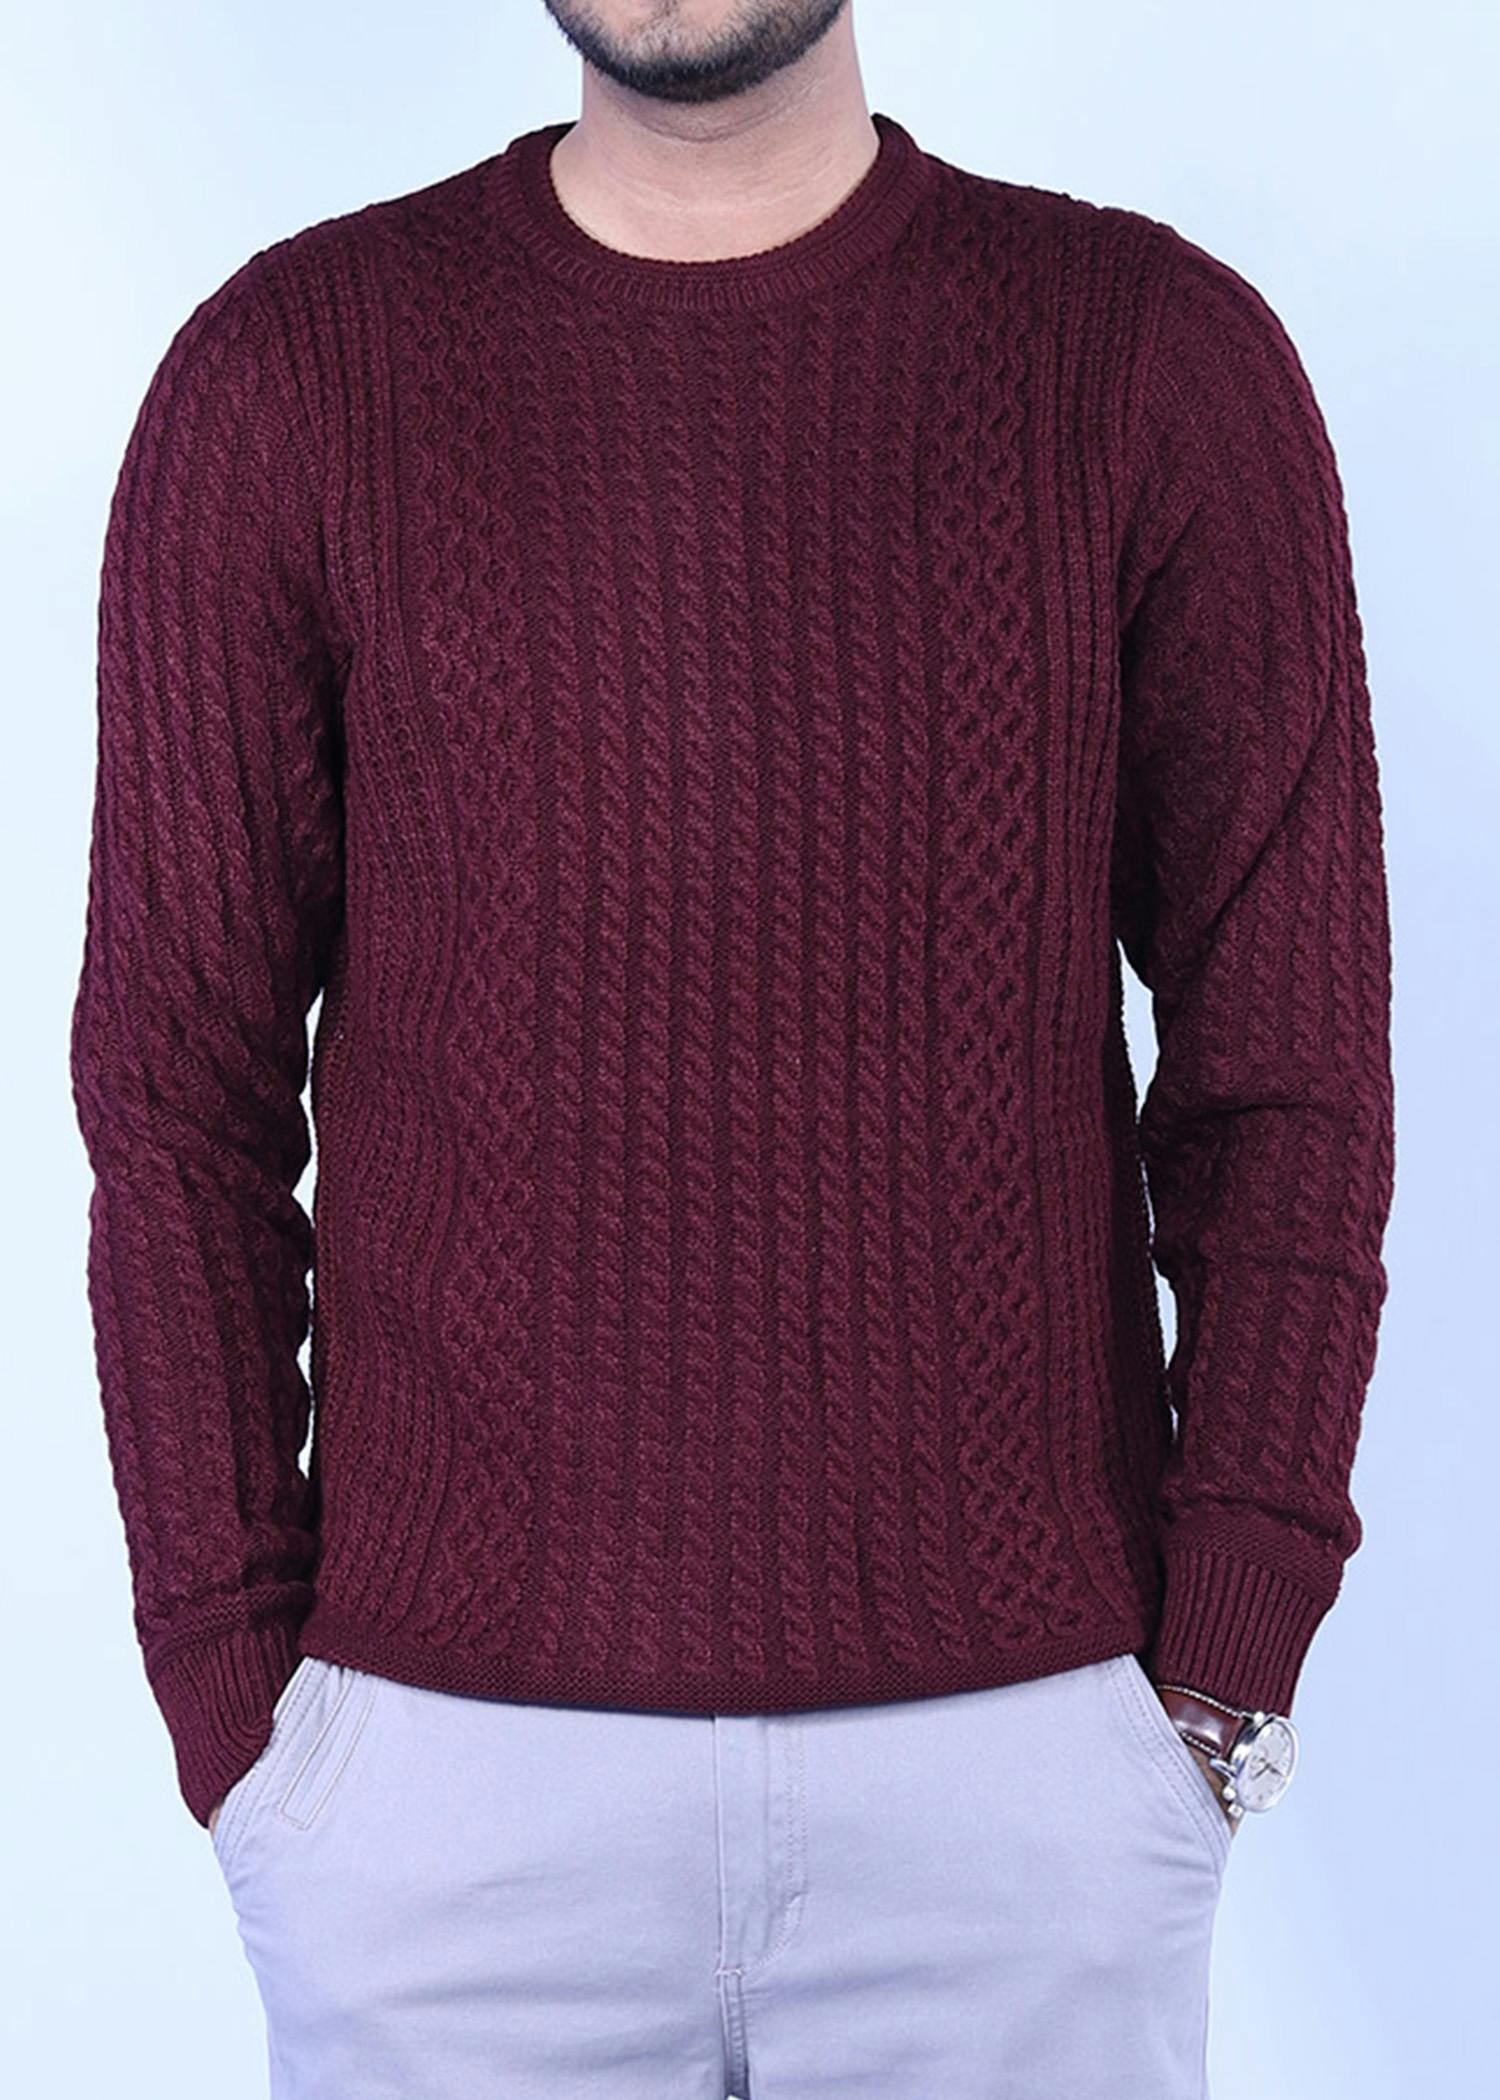 hillstar viii sweater broduex color headcropped